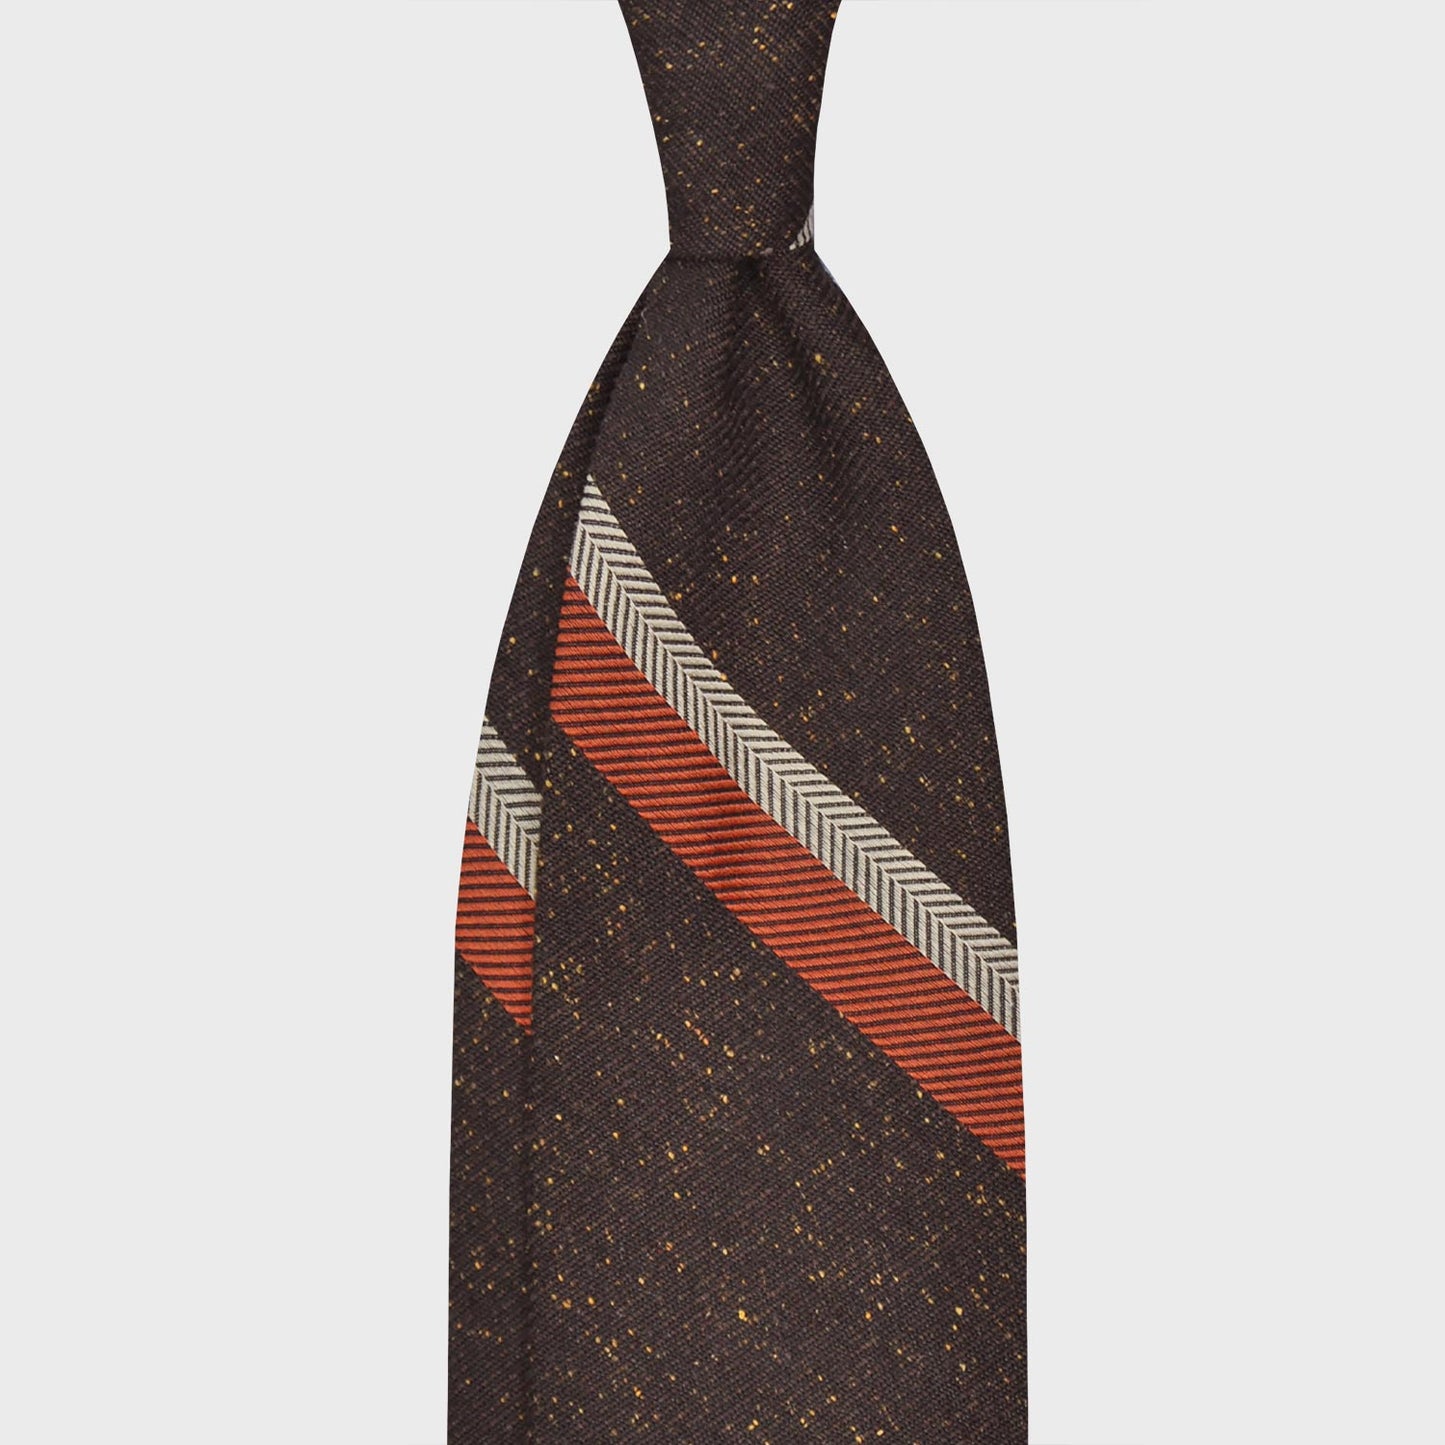 Donegal Brown Silk Wool Striped Tie. Refined regimental grenadine necktie made with silk and wool, hand rolled edge, unlined 3 folds, dark brown and yellow dots background donegal pattern, silver grey and orange striped, F.Marino Napoli exclusive for Wools Boutique Uomo